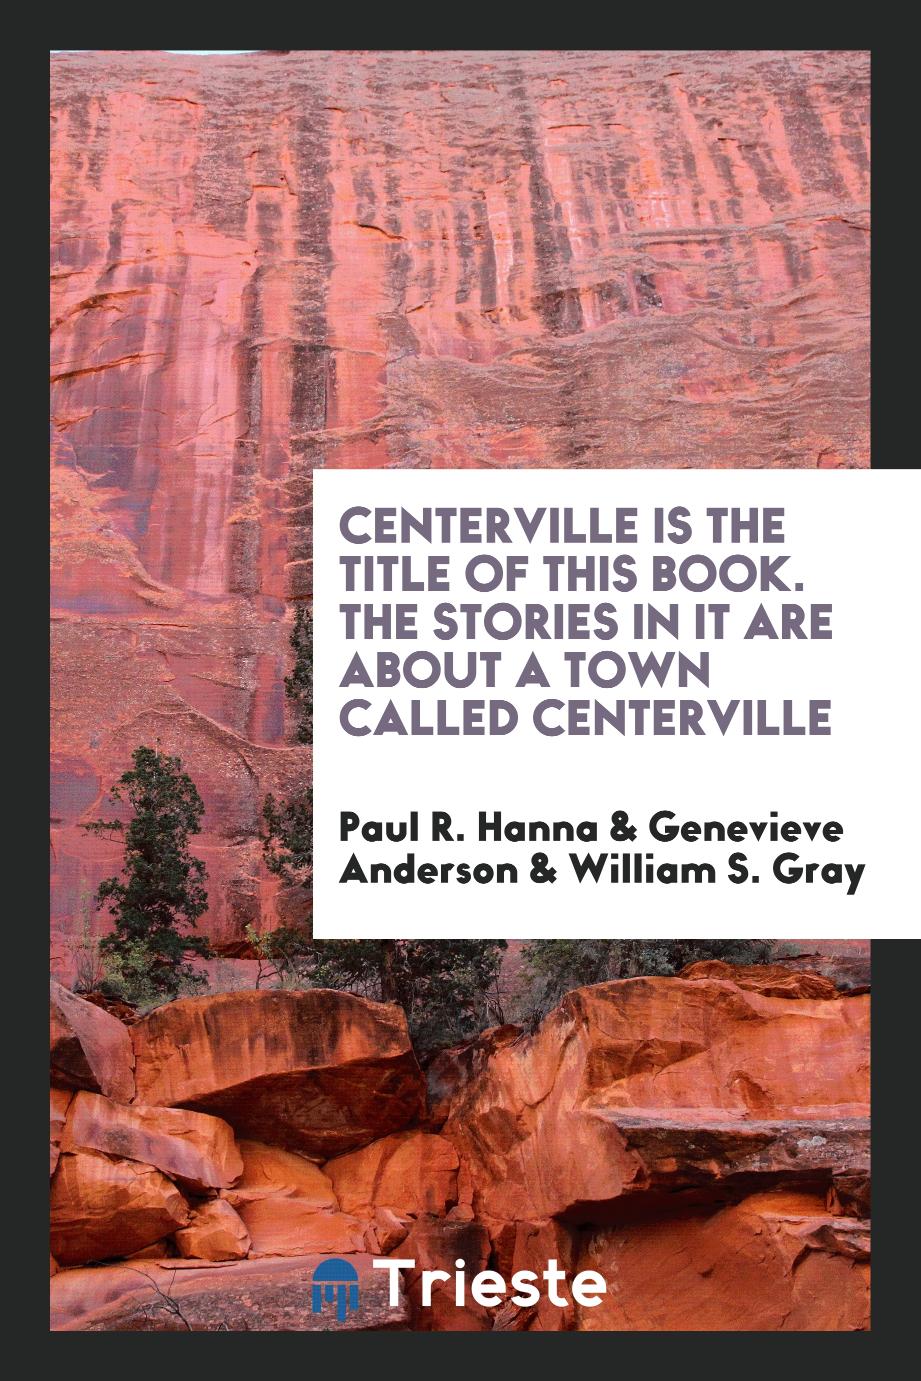 Centerville is the title of this book. The stories in it are about a town called Centerville